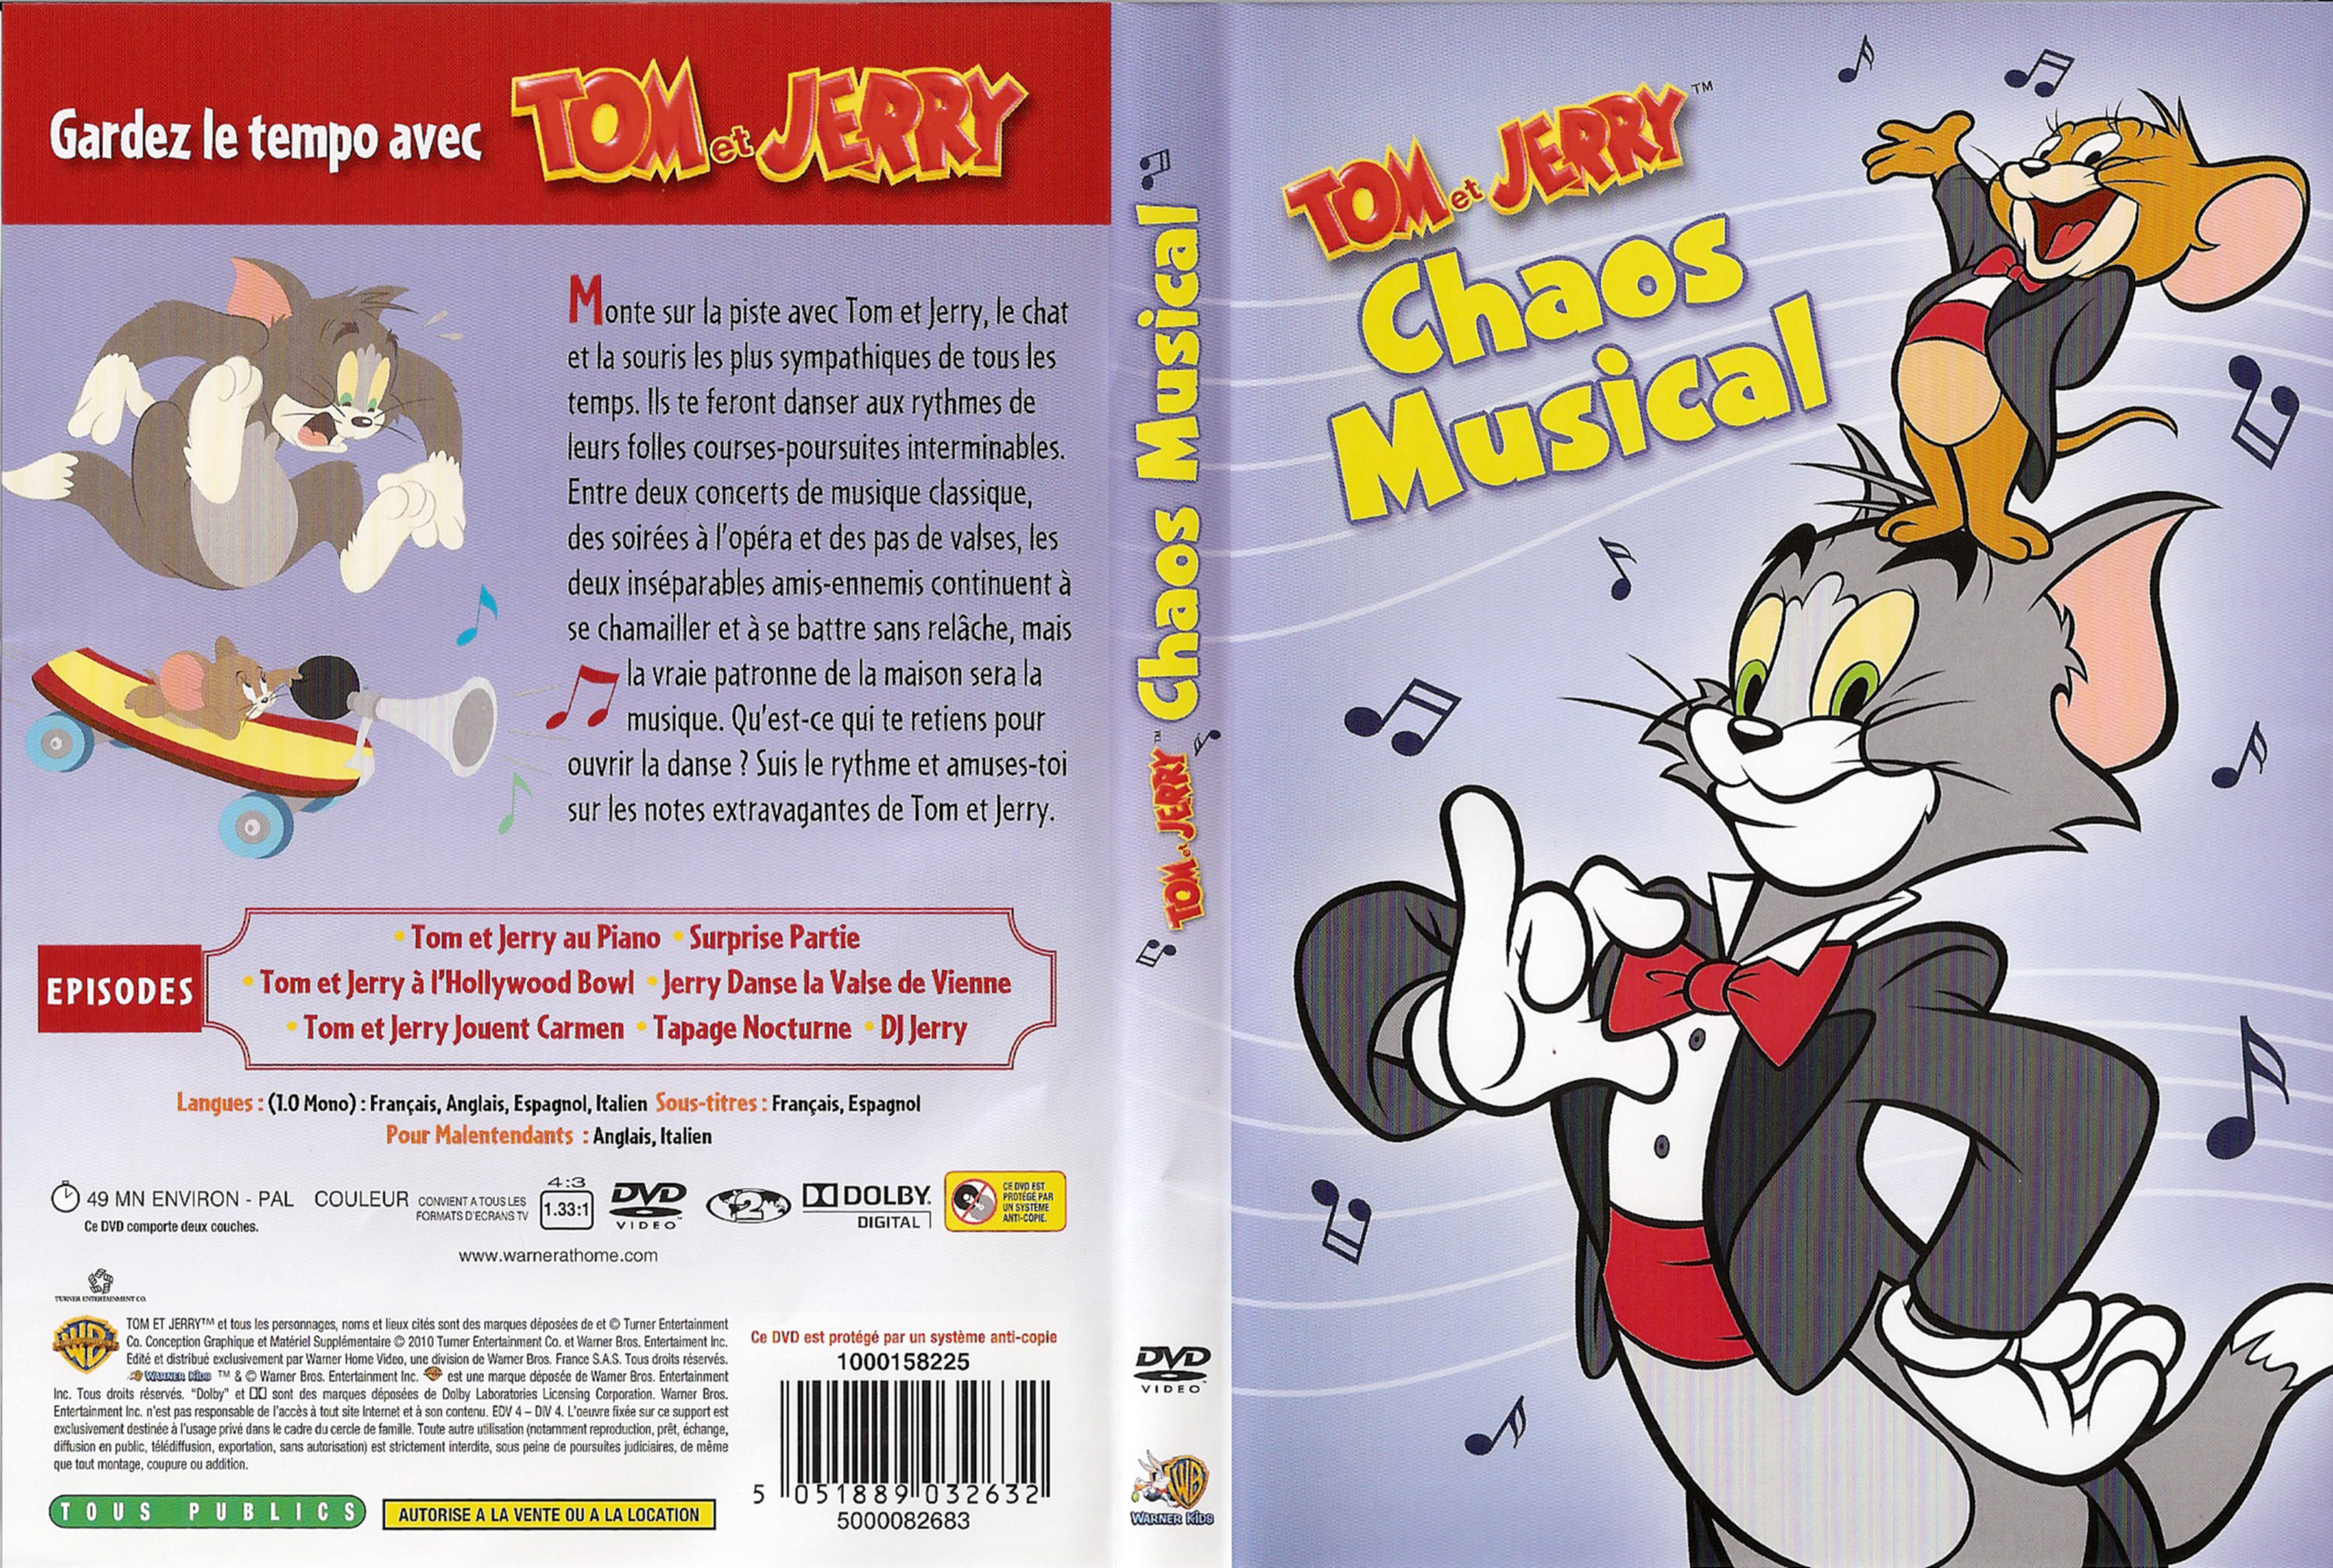 Jaquette DVD Tom et Jerry - Chaos musical